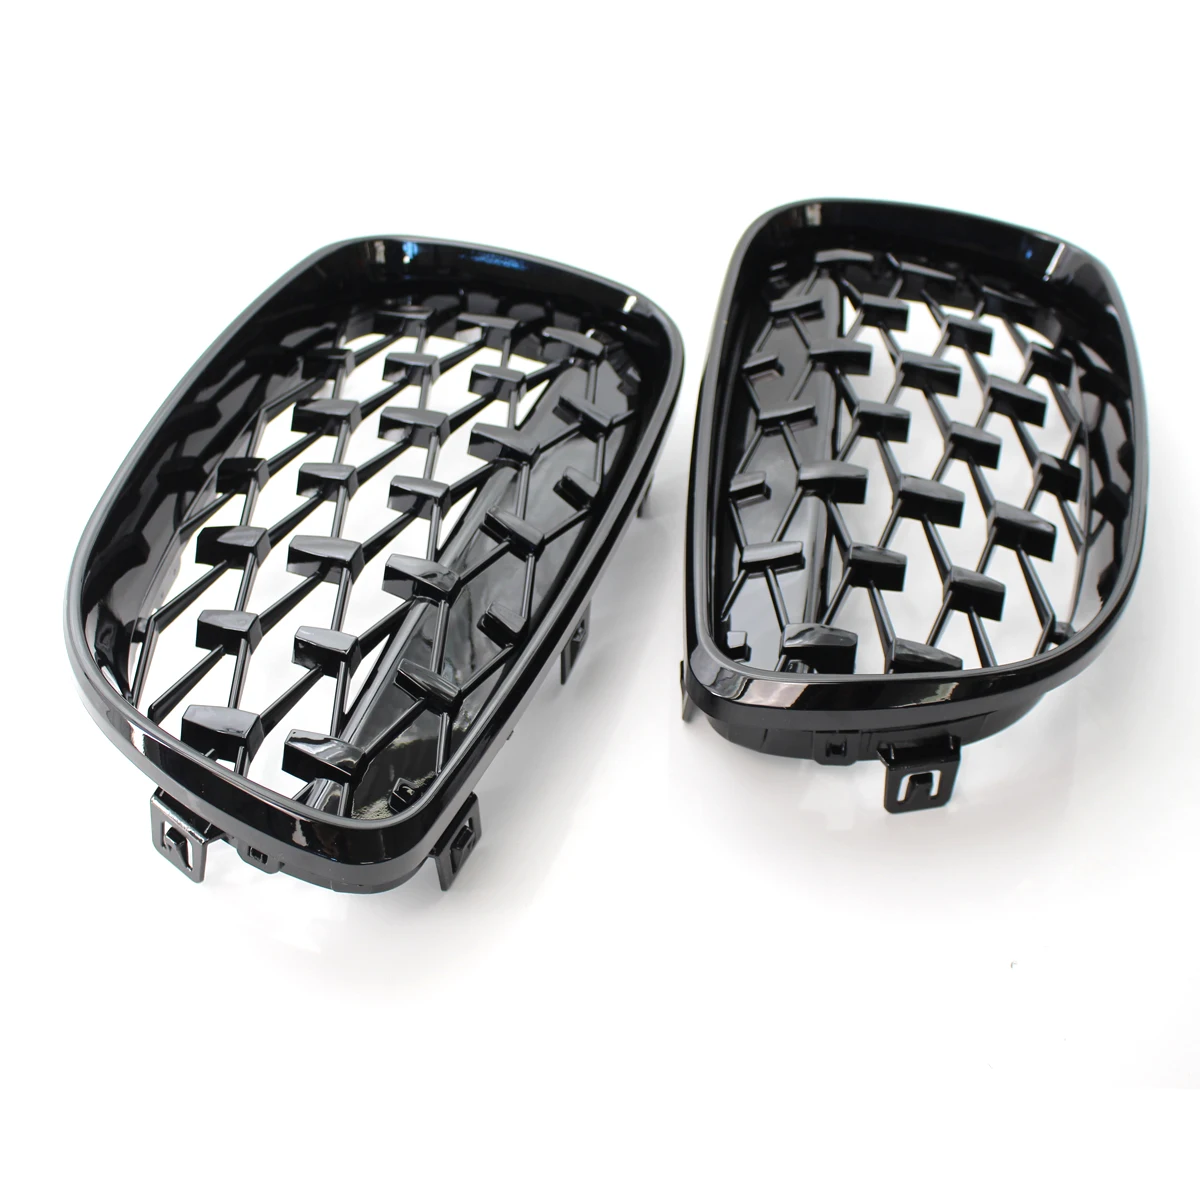 

1Pair Car Front Bumper Cover Diamond Kidney Grilles Racing Grille for BMW 1 Series E87 2008-2011 Automobile Replacement Parts